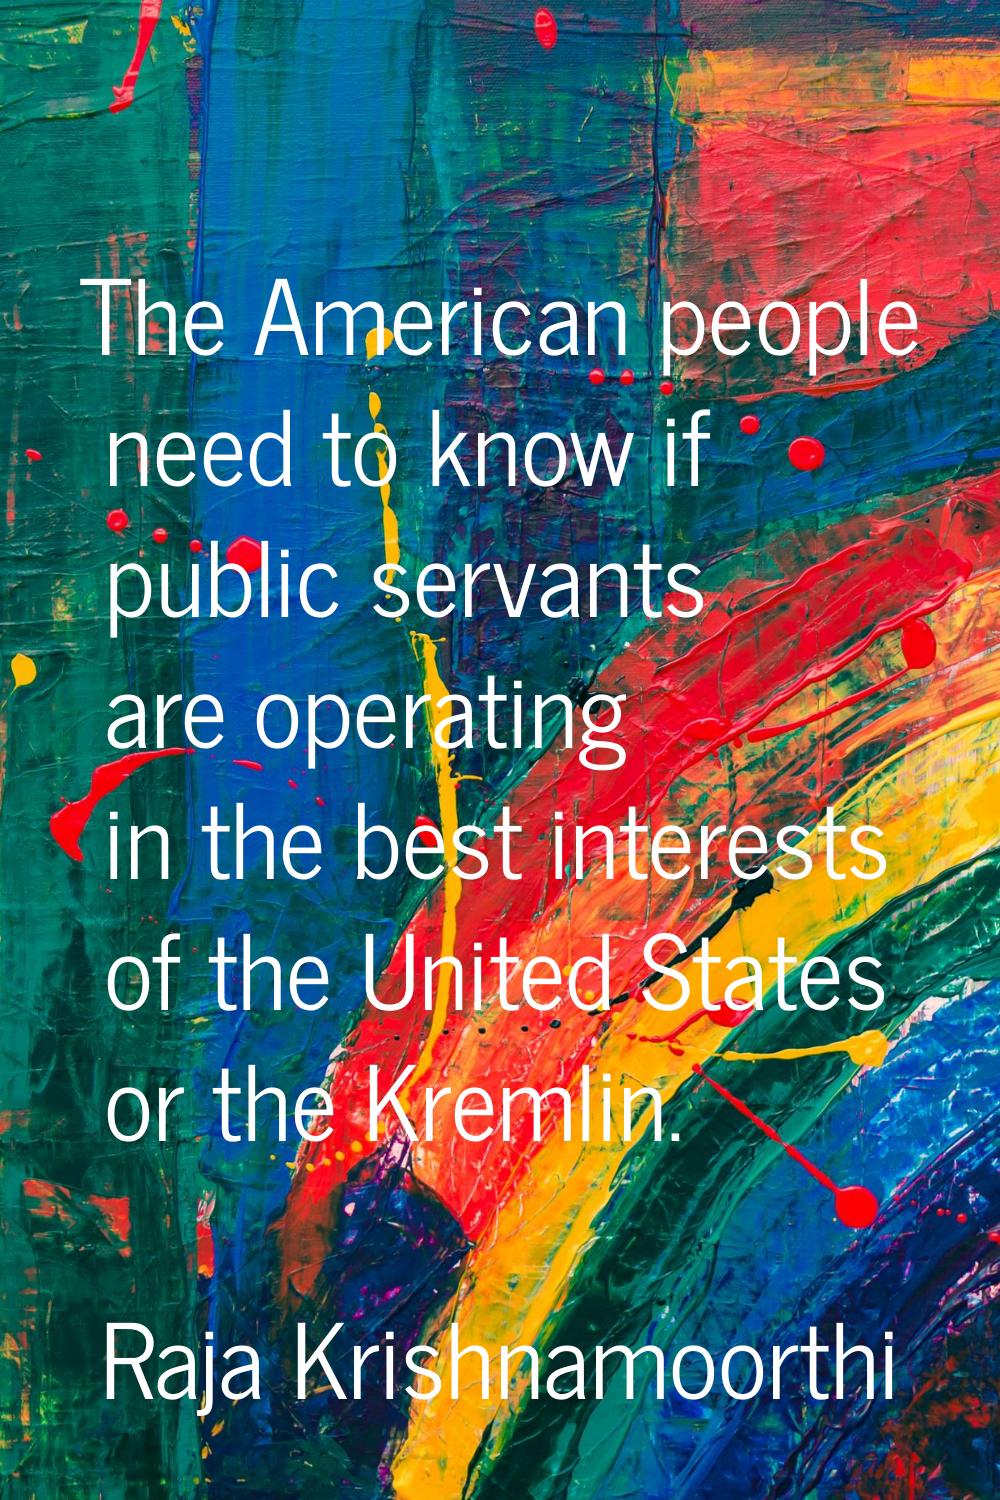 The American people need to know if public servants are operating in the best interests of the Unit